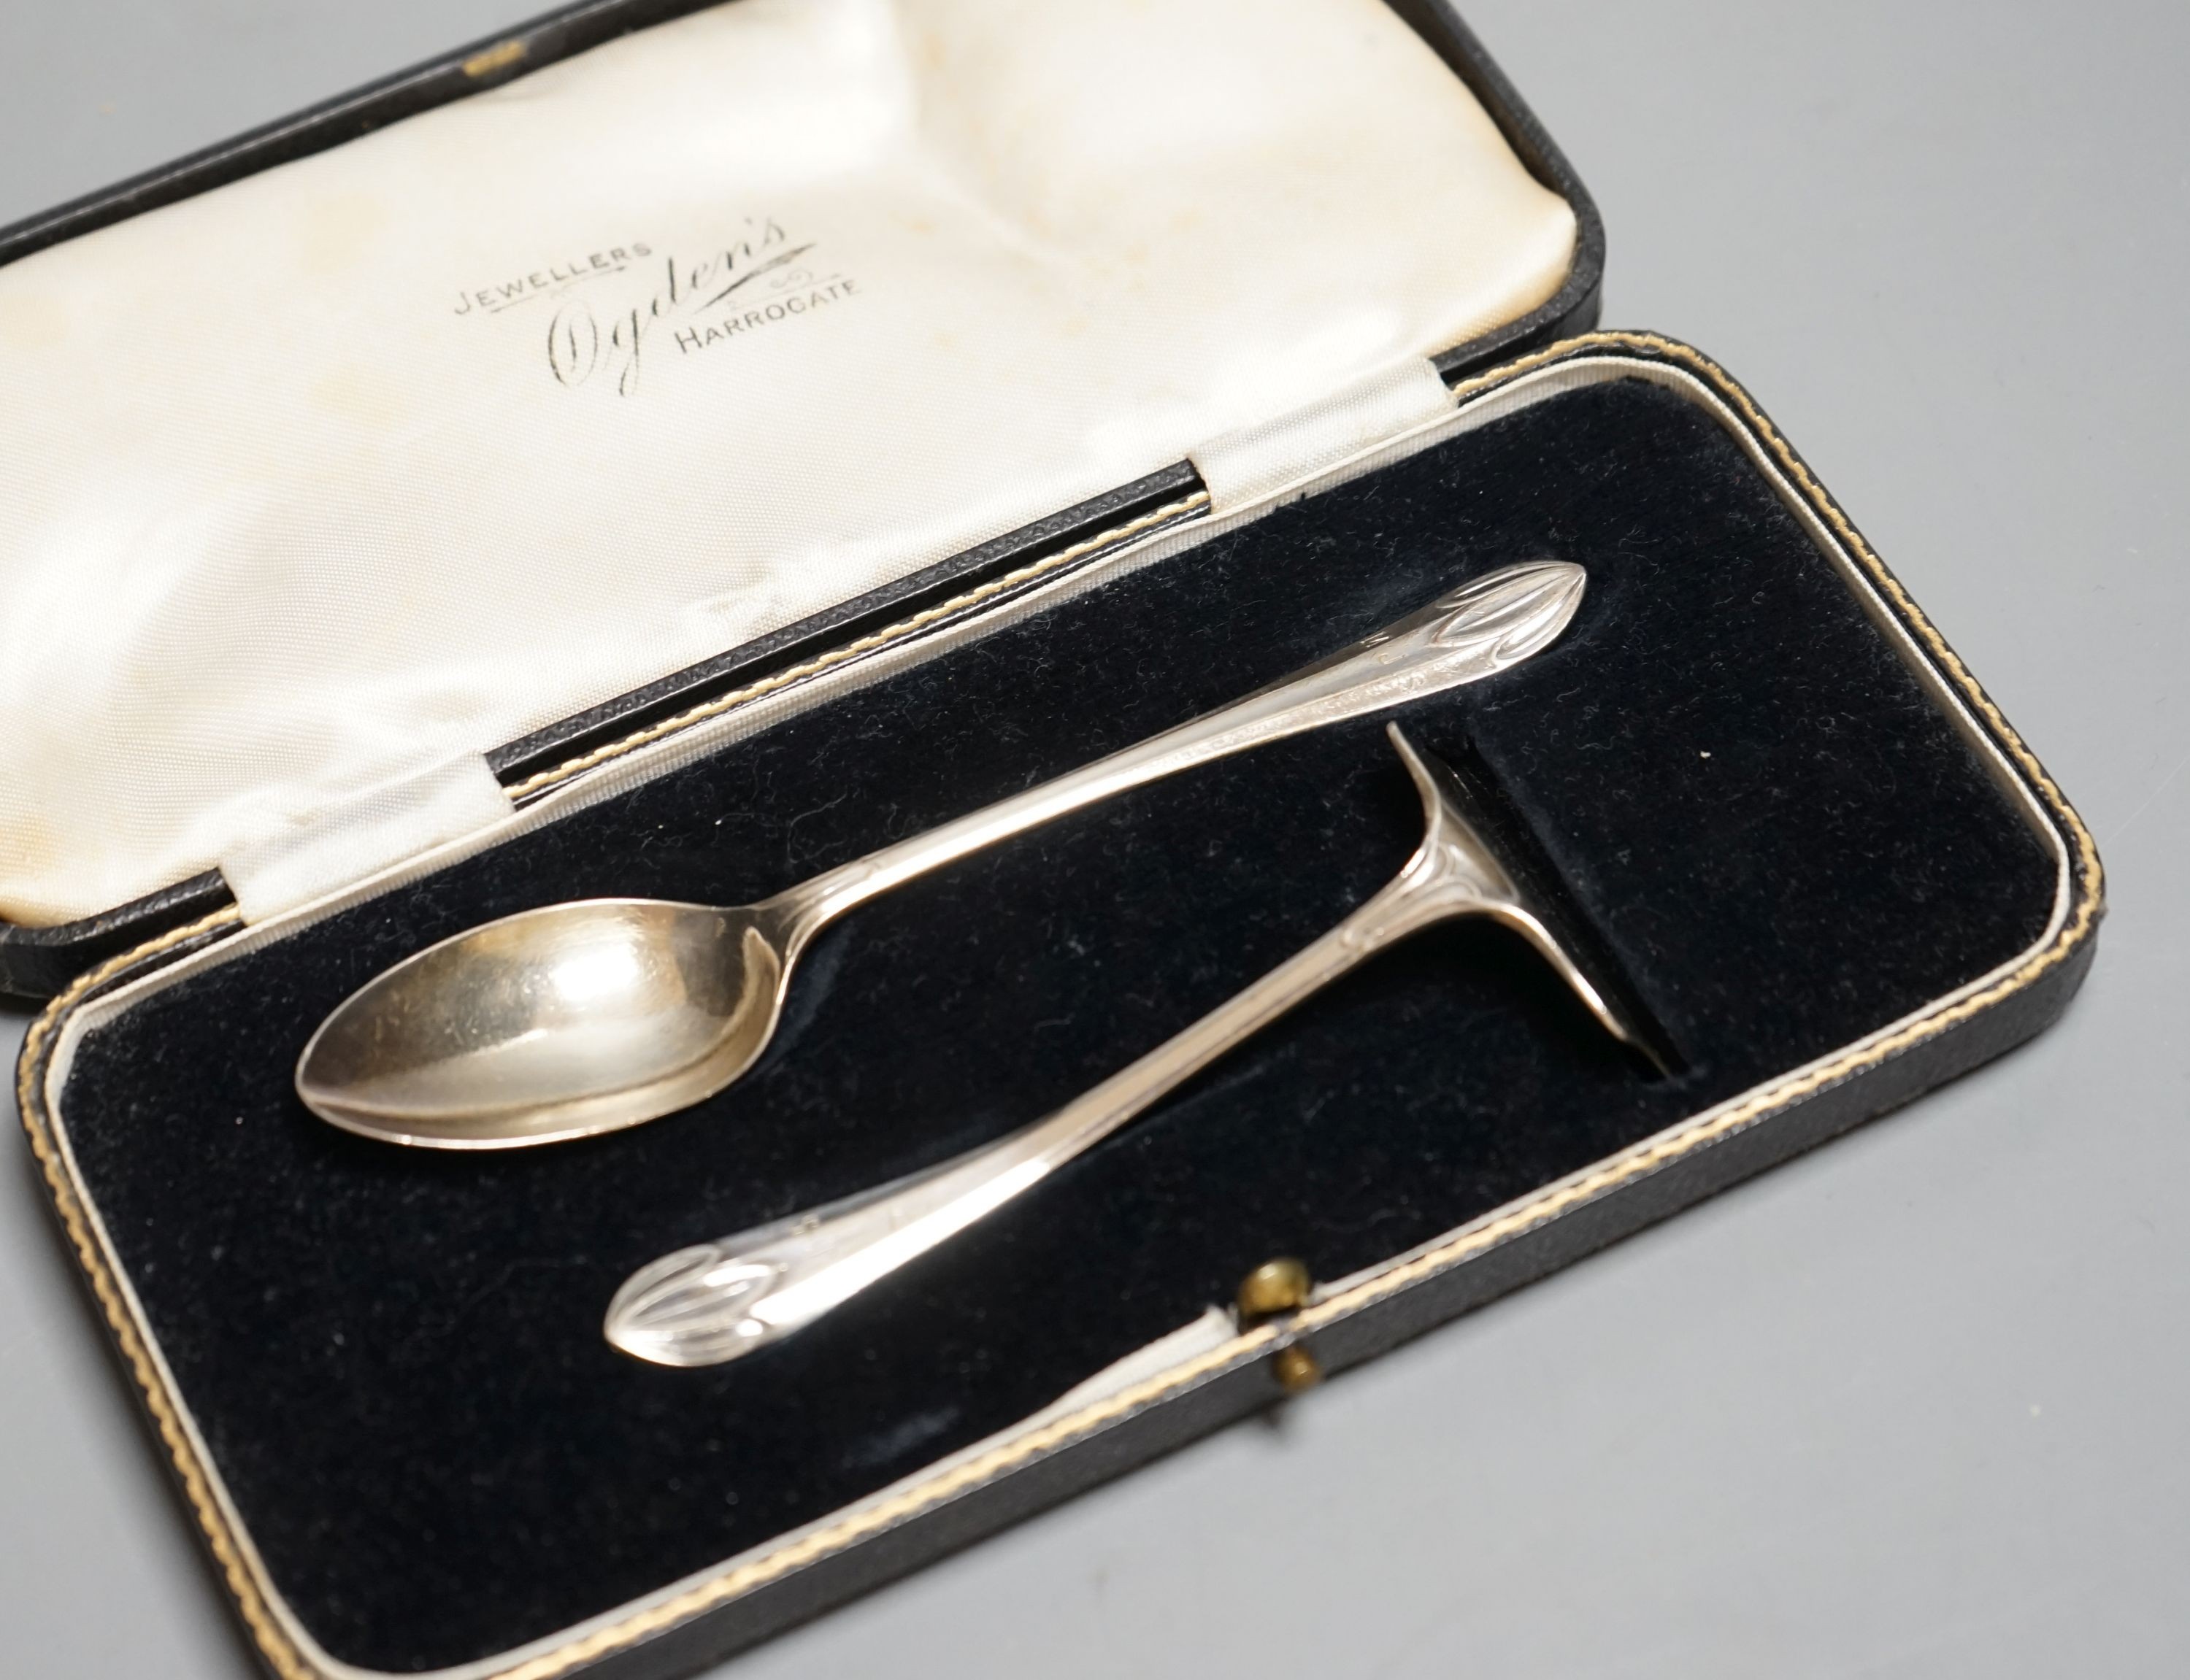 A cased George V silver spoon and pusher.